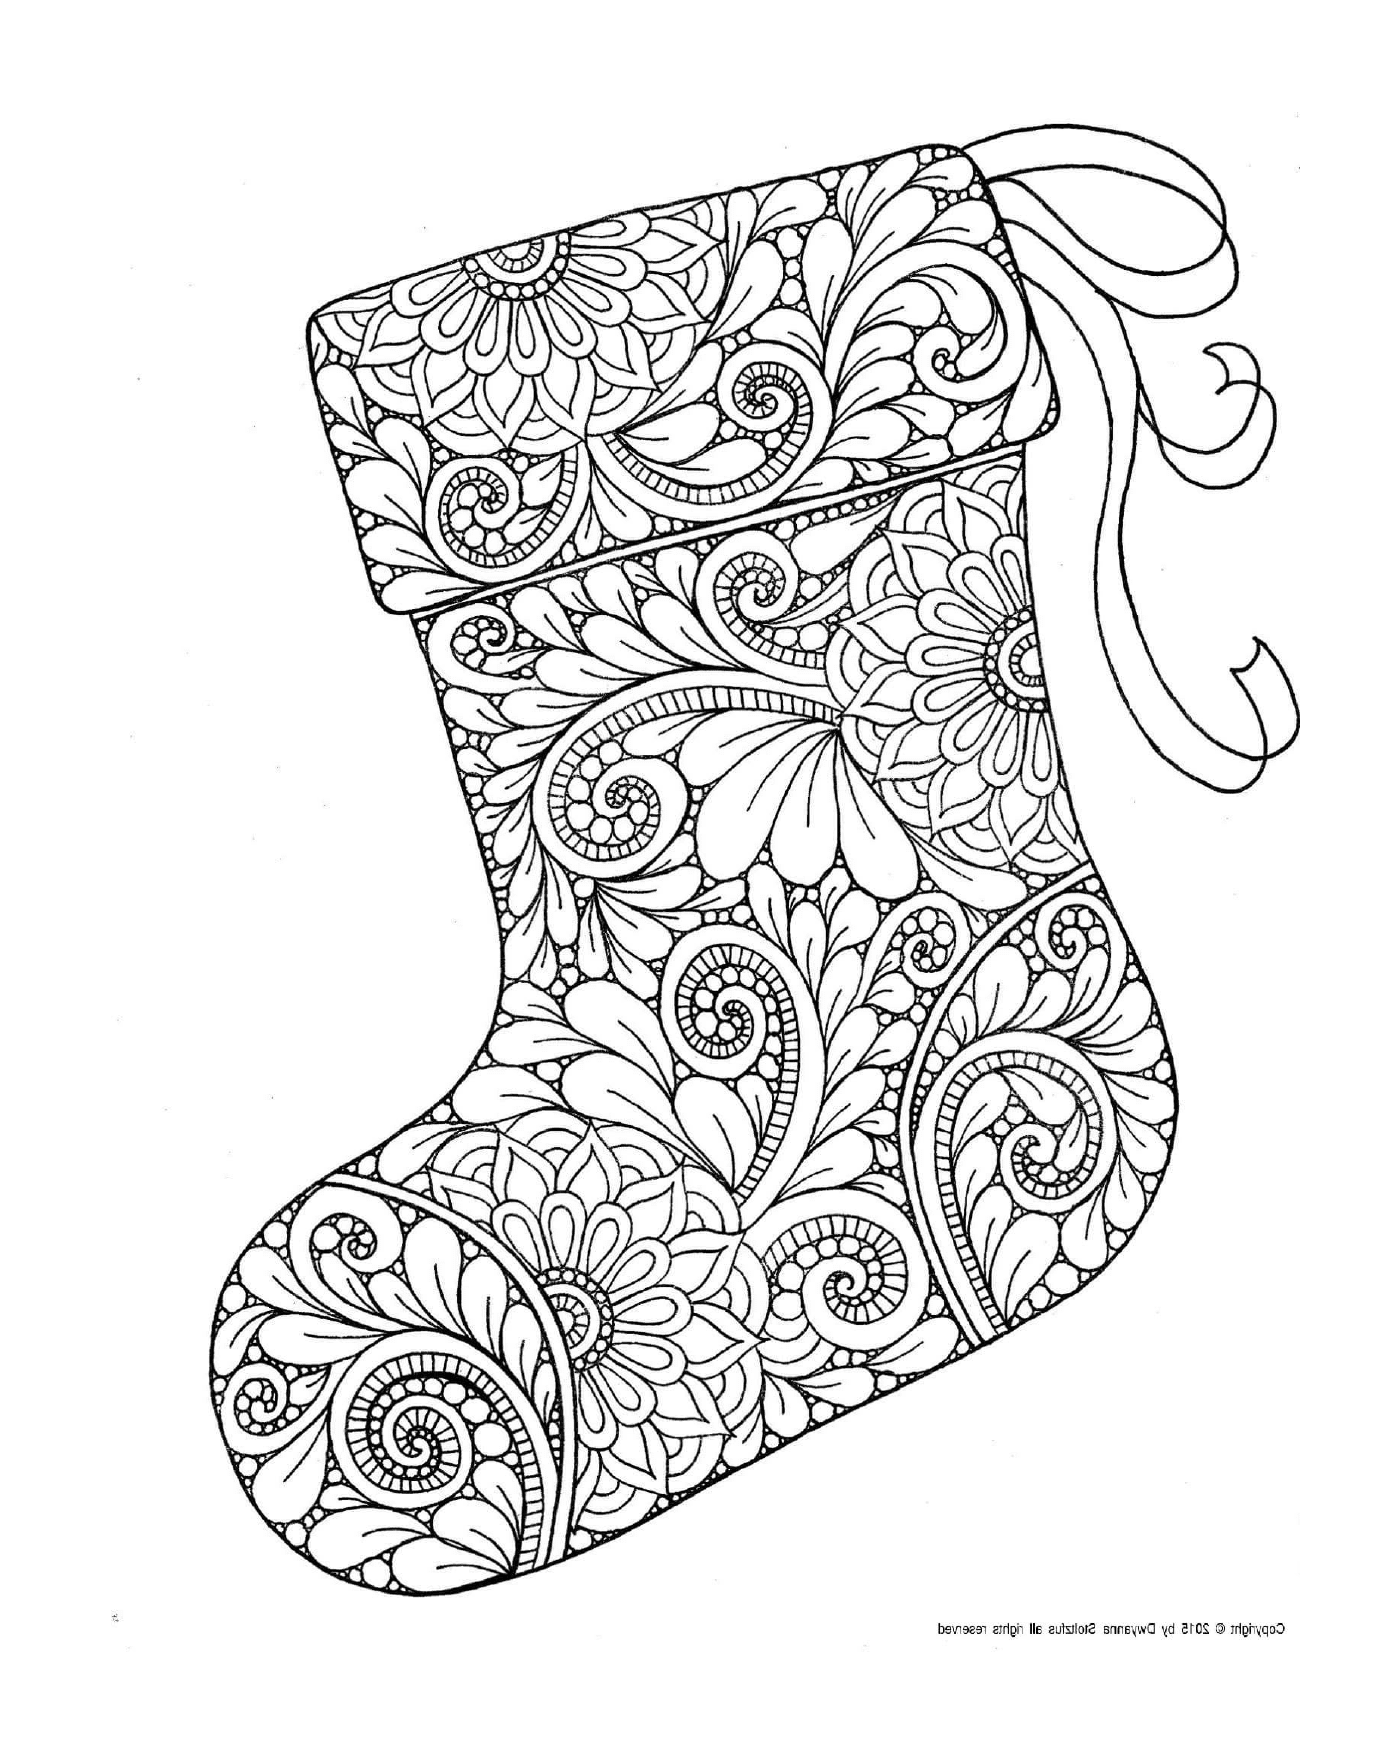  Christmas stockings with floral pattern 